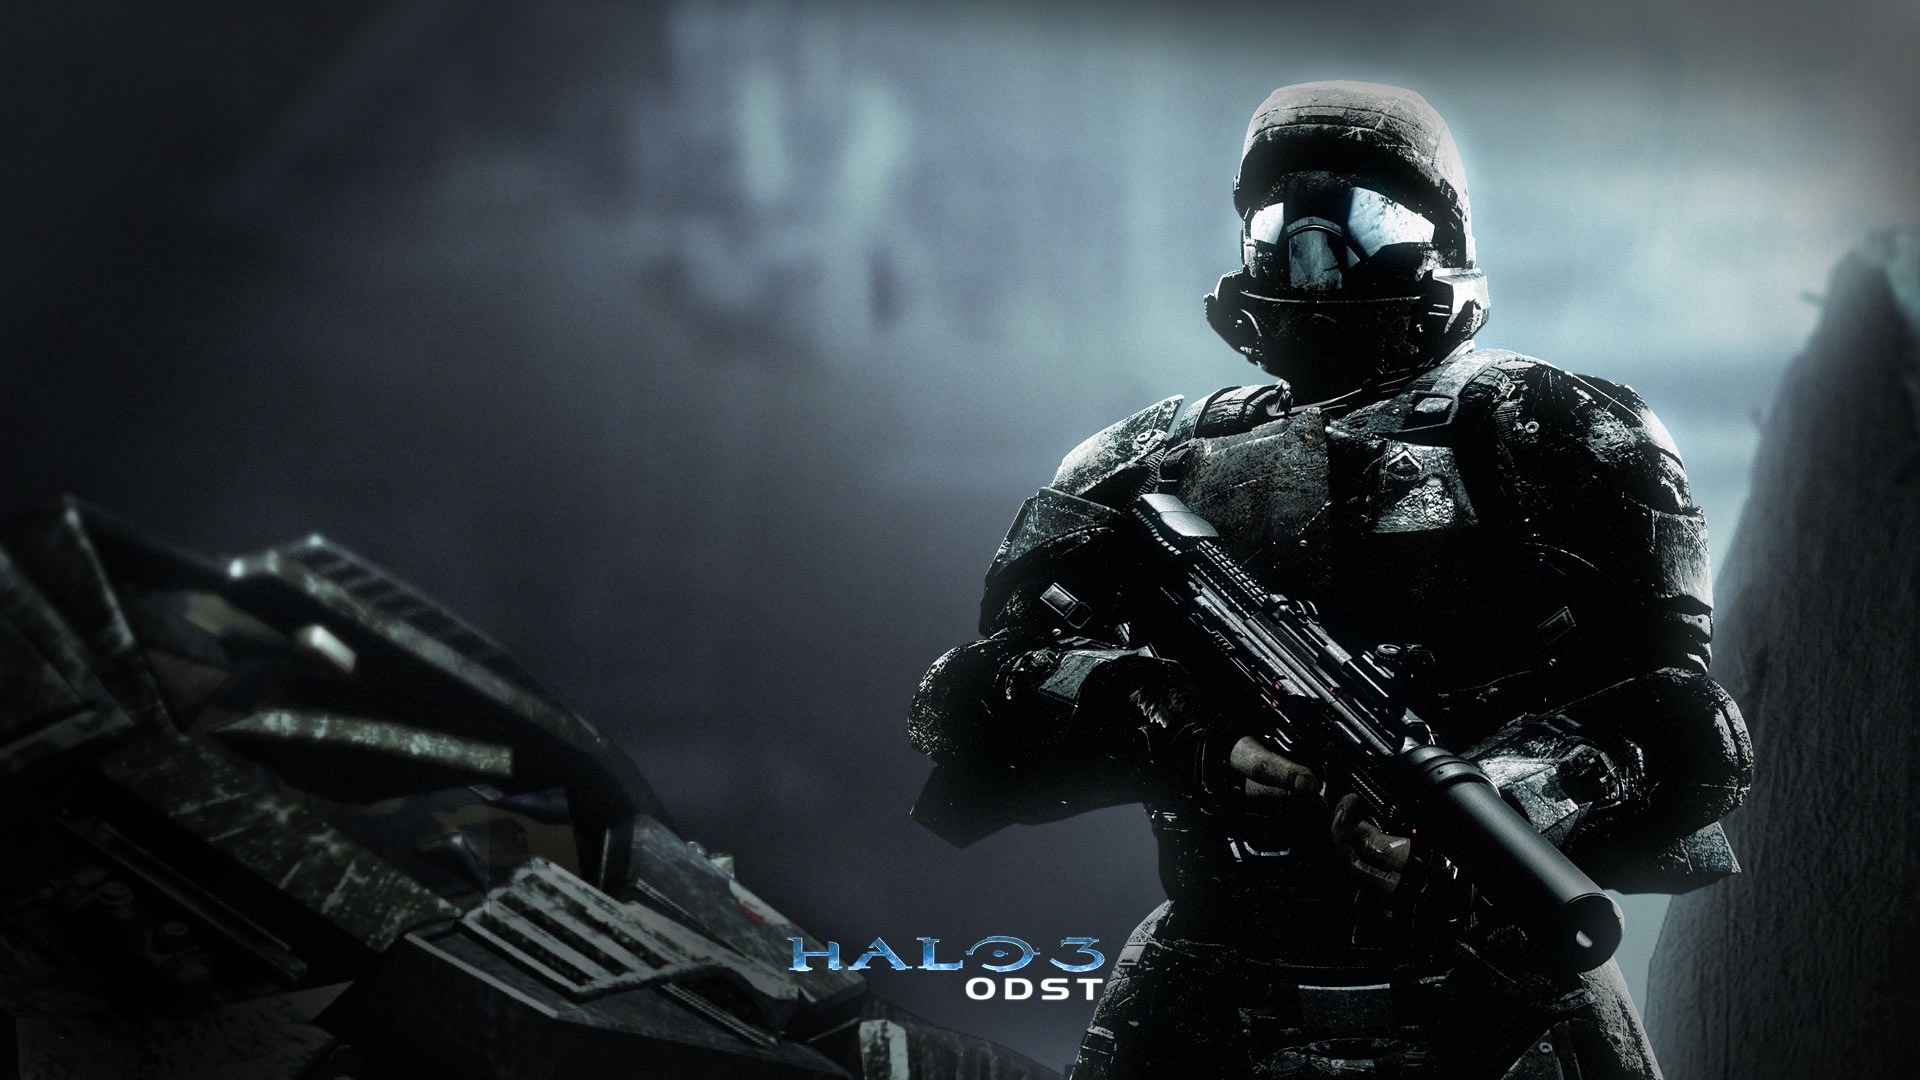 Halo 3 ODST for 1920 x 1080 HDTV 1080p resolution